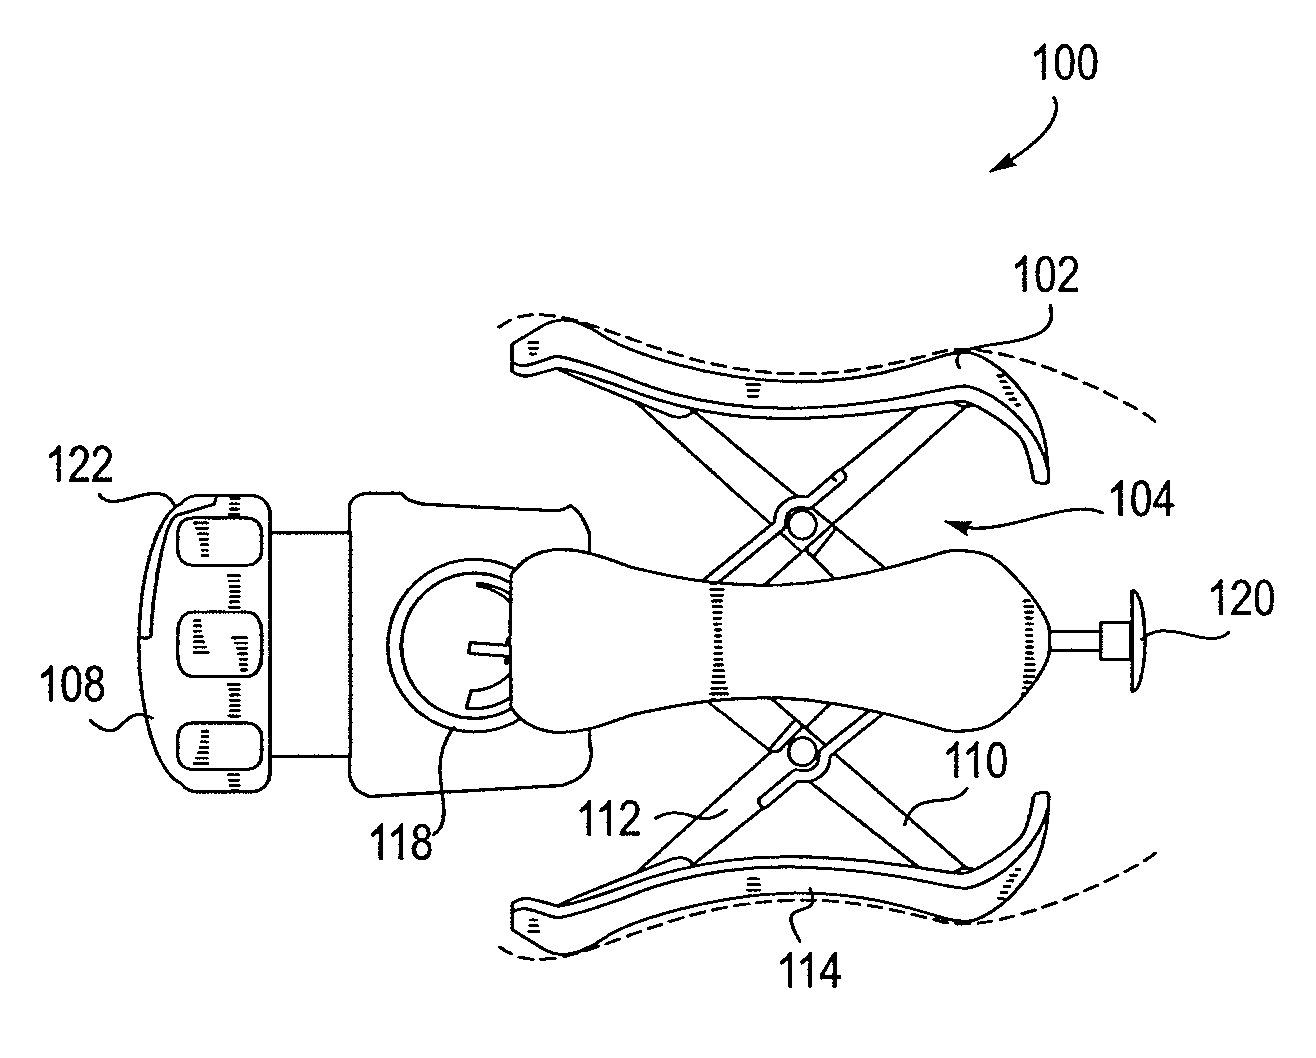 Method and apparatus for preventing vaginal lacerations during childbirth